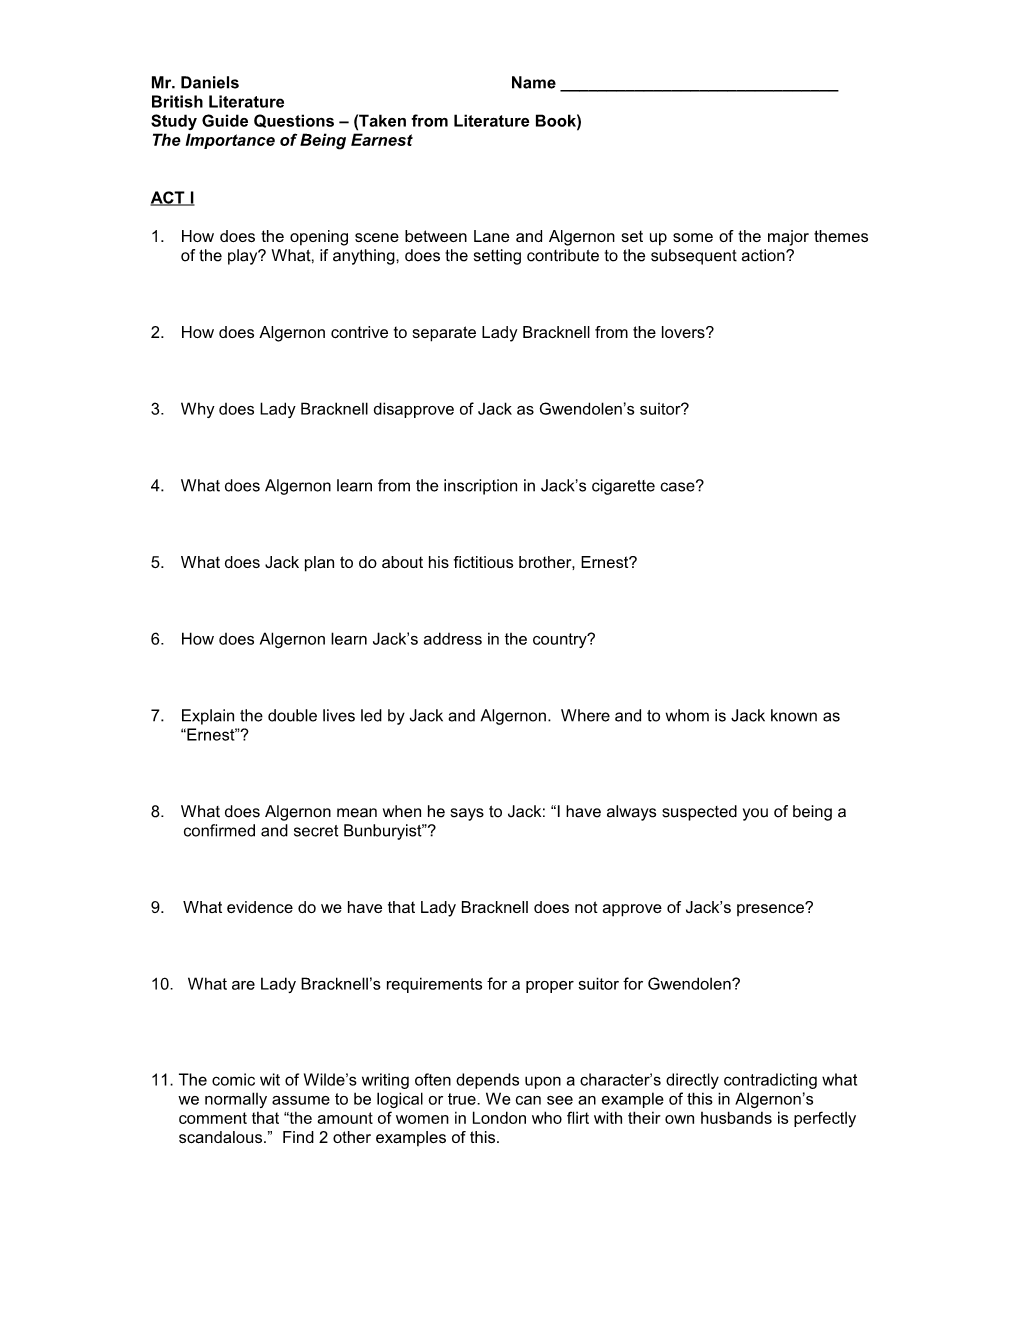 Study Guide Questions (Taken from Literature Book)